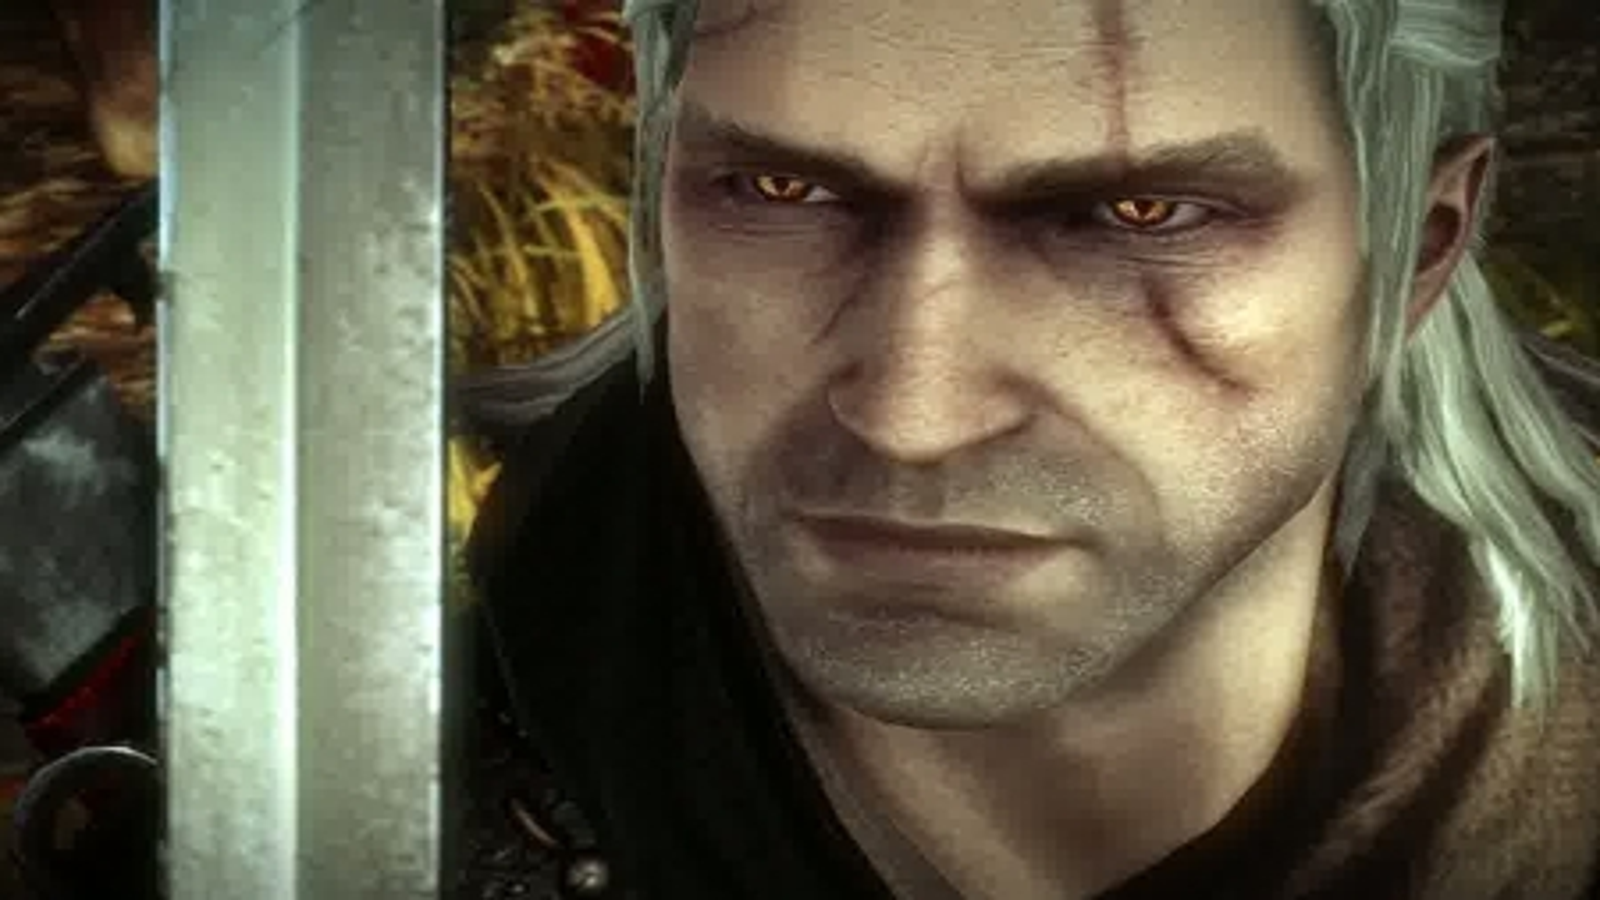 The Witcher 2: Assassins of Kings - Launch Trailer (PC, PS3, Xbox 360) 